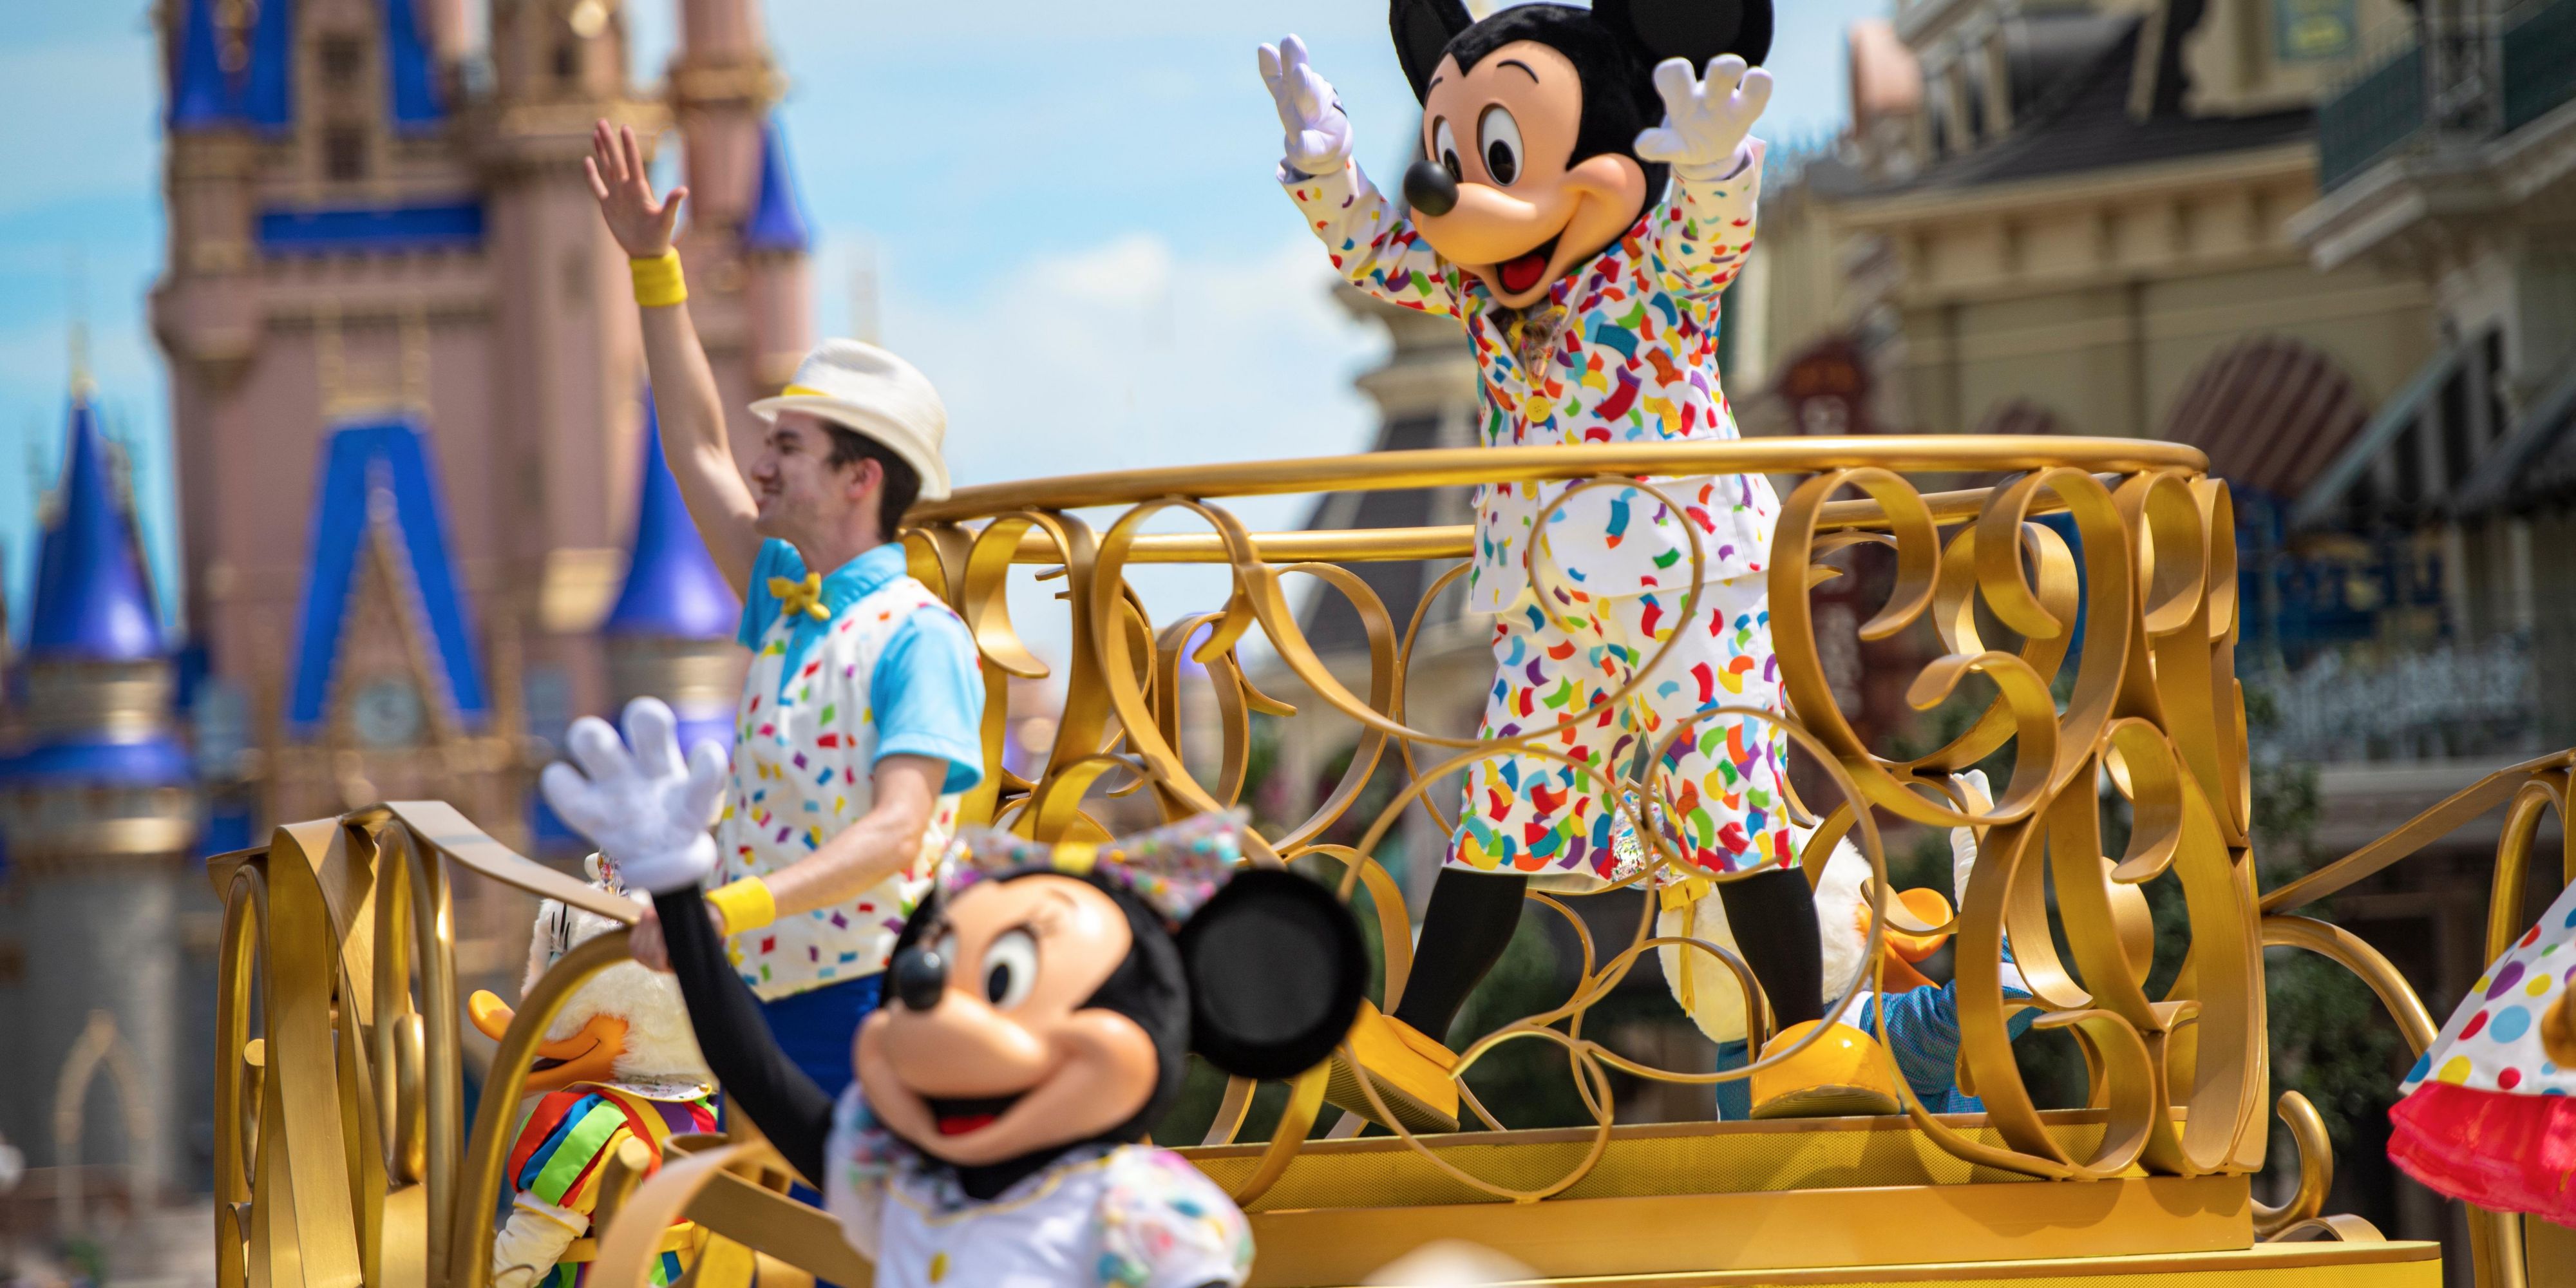 Disney World parade float with Mickey and Minnie Mouse